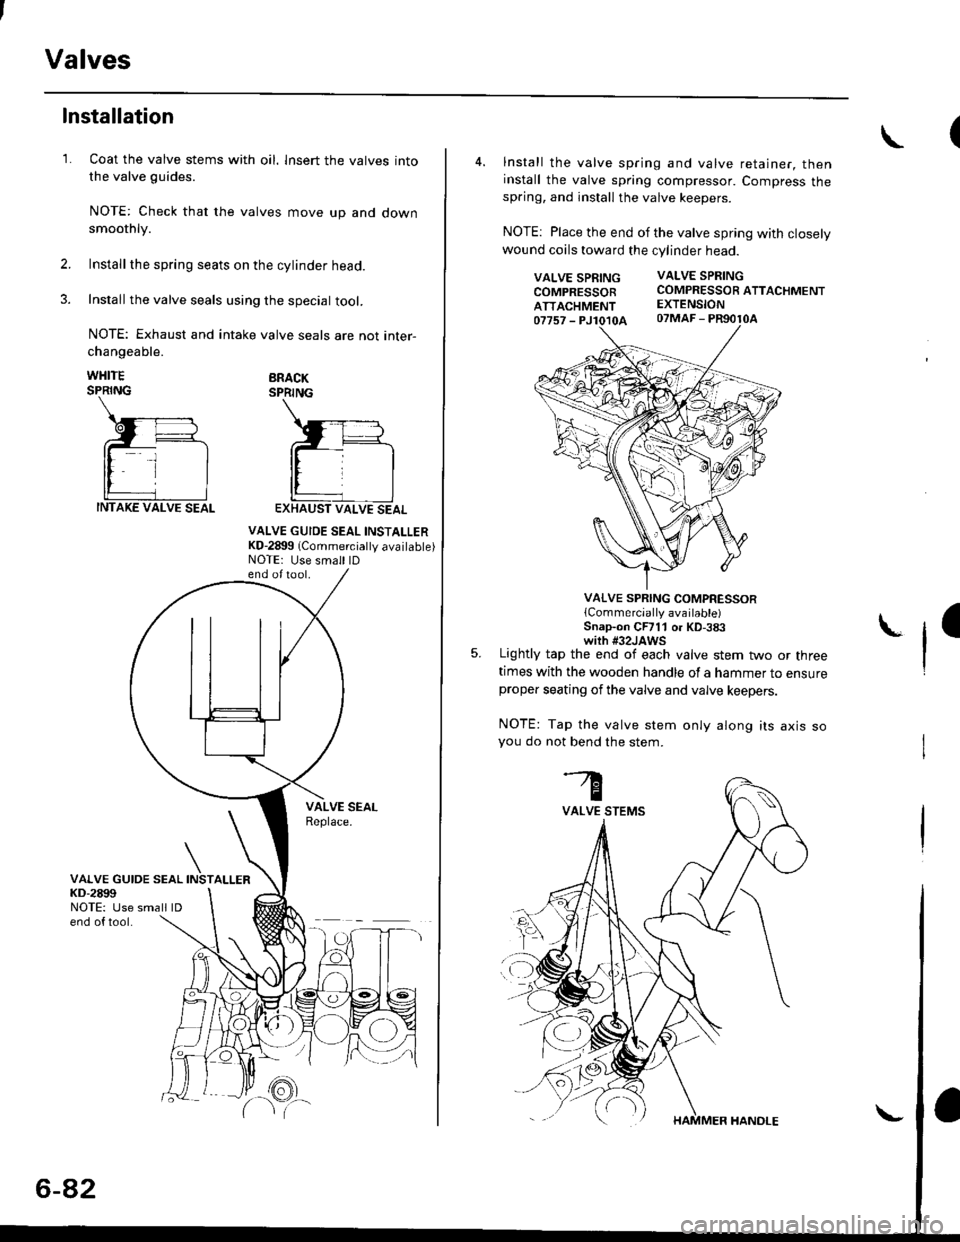 HONDA CIVIC 2000 6.G Owners Guide Valves
1.
Installation
Coat the valve stems with oil. lnsert the valves into
the valve guides.
NOTE: Check that the valves move up and downsmoothly.
Installthe spring seats on the cylinder head.
Insta